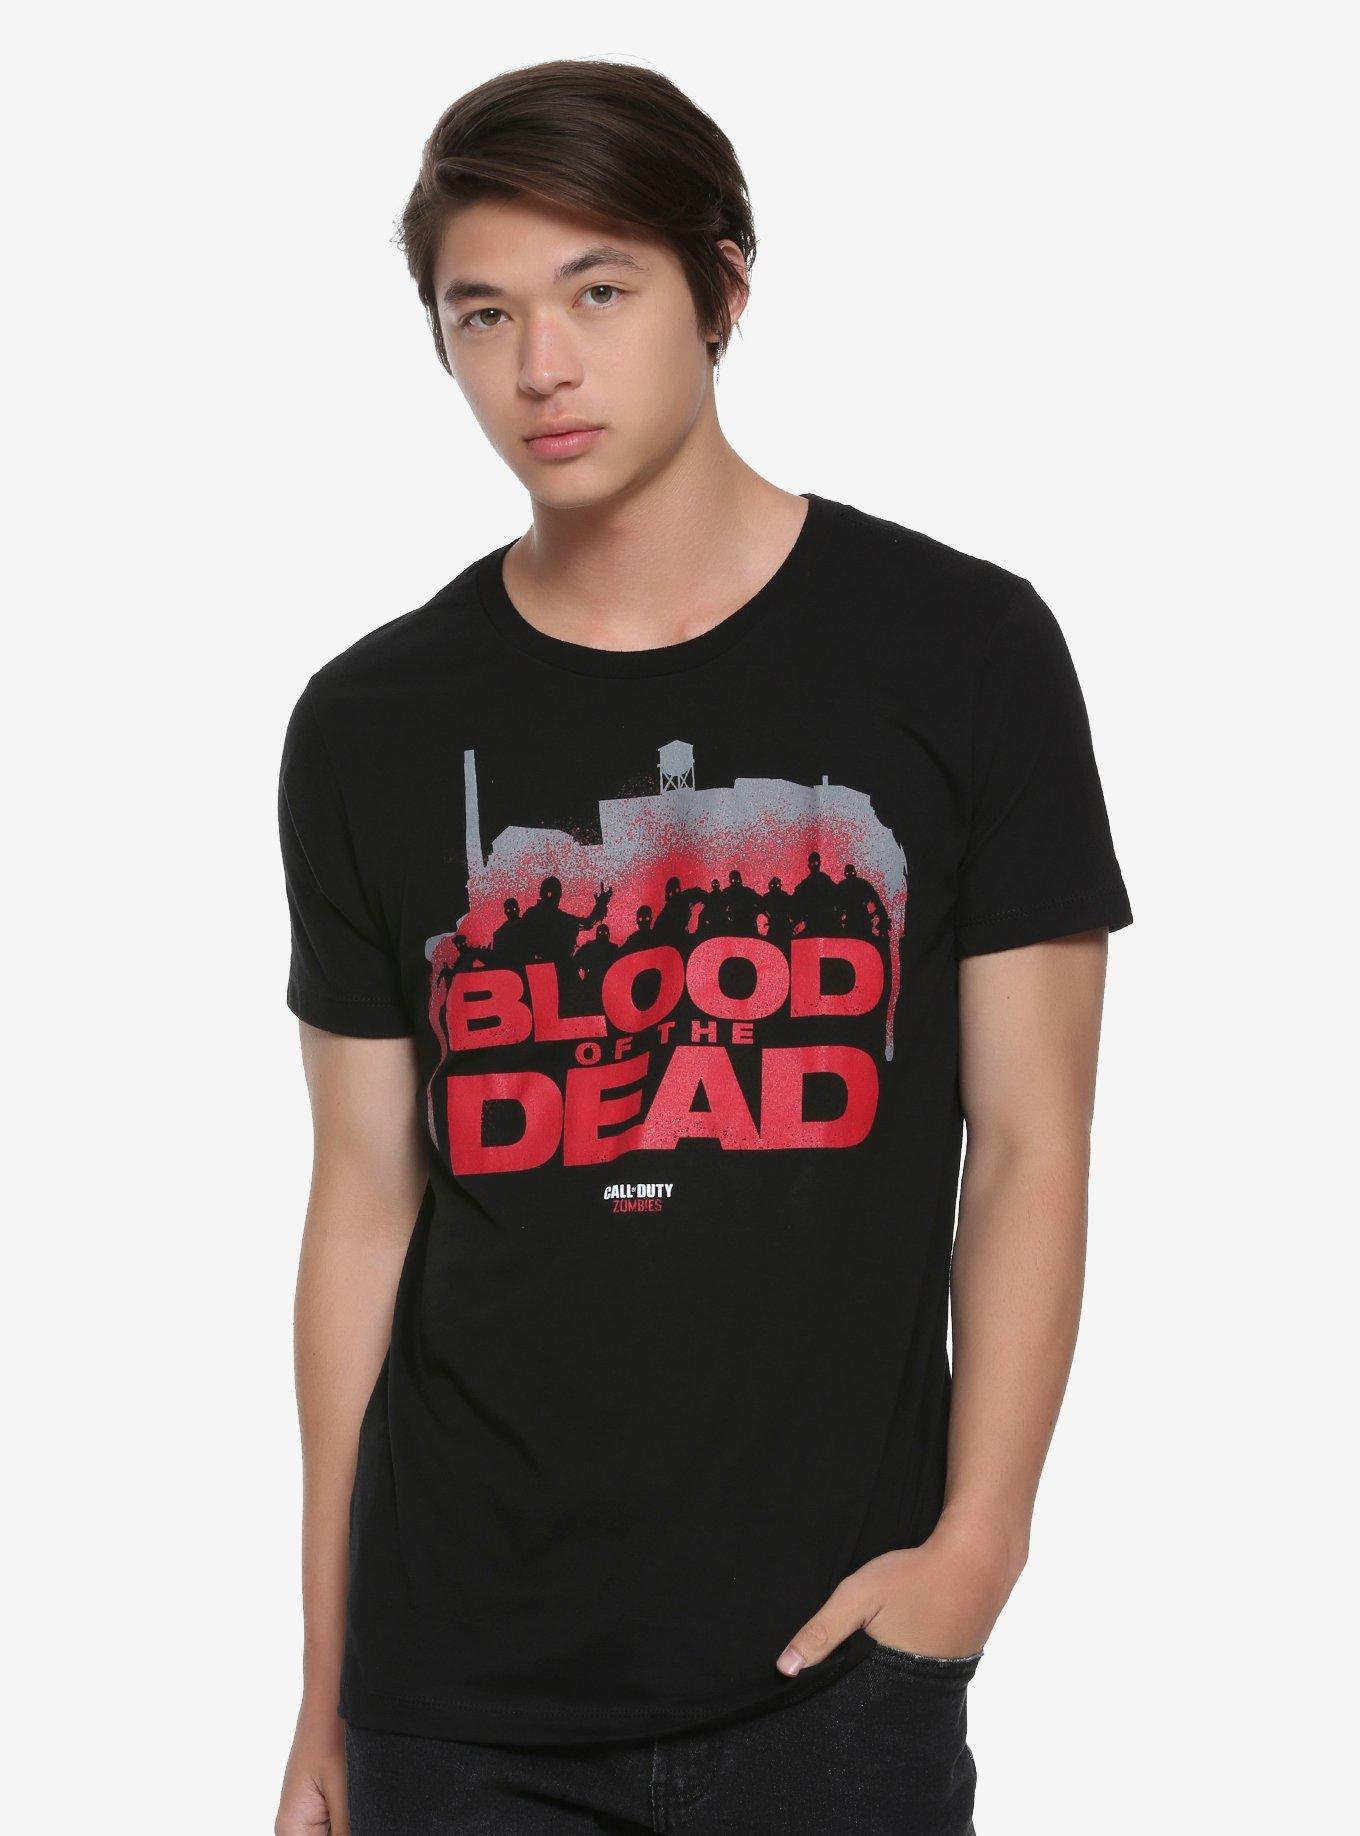 Call Of Duty Blood Of The Dead Teaser T-Shirt Hot Topic Exclusive, , alternate